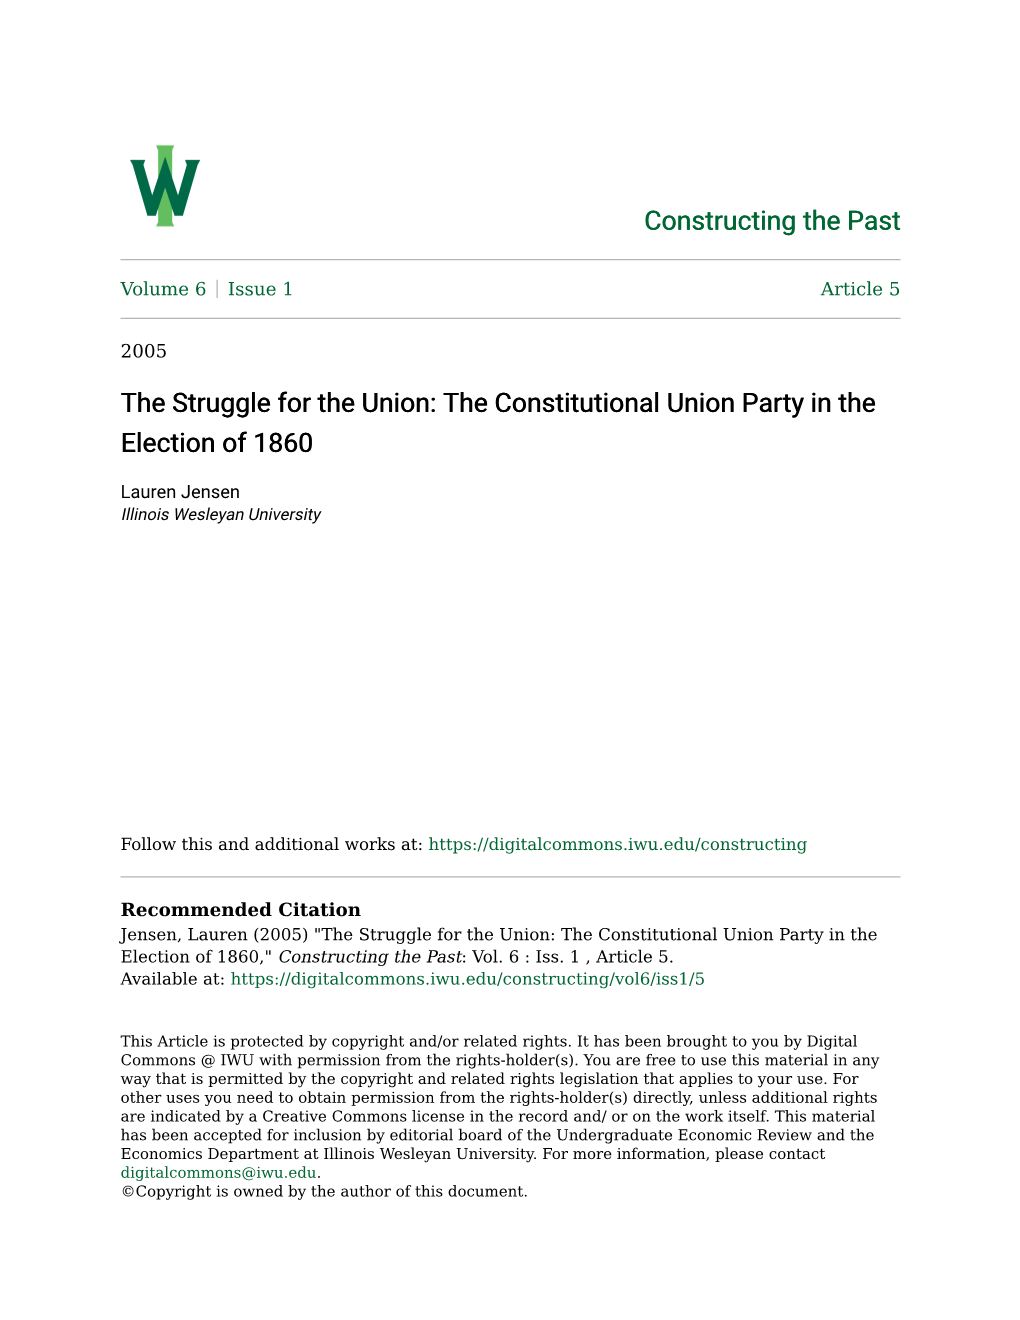 The Struggle for the Union: the Constitutional Union Party in the Election of 1860